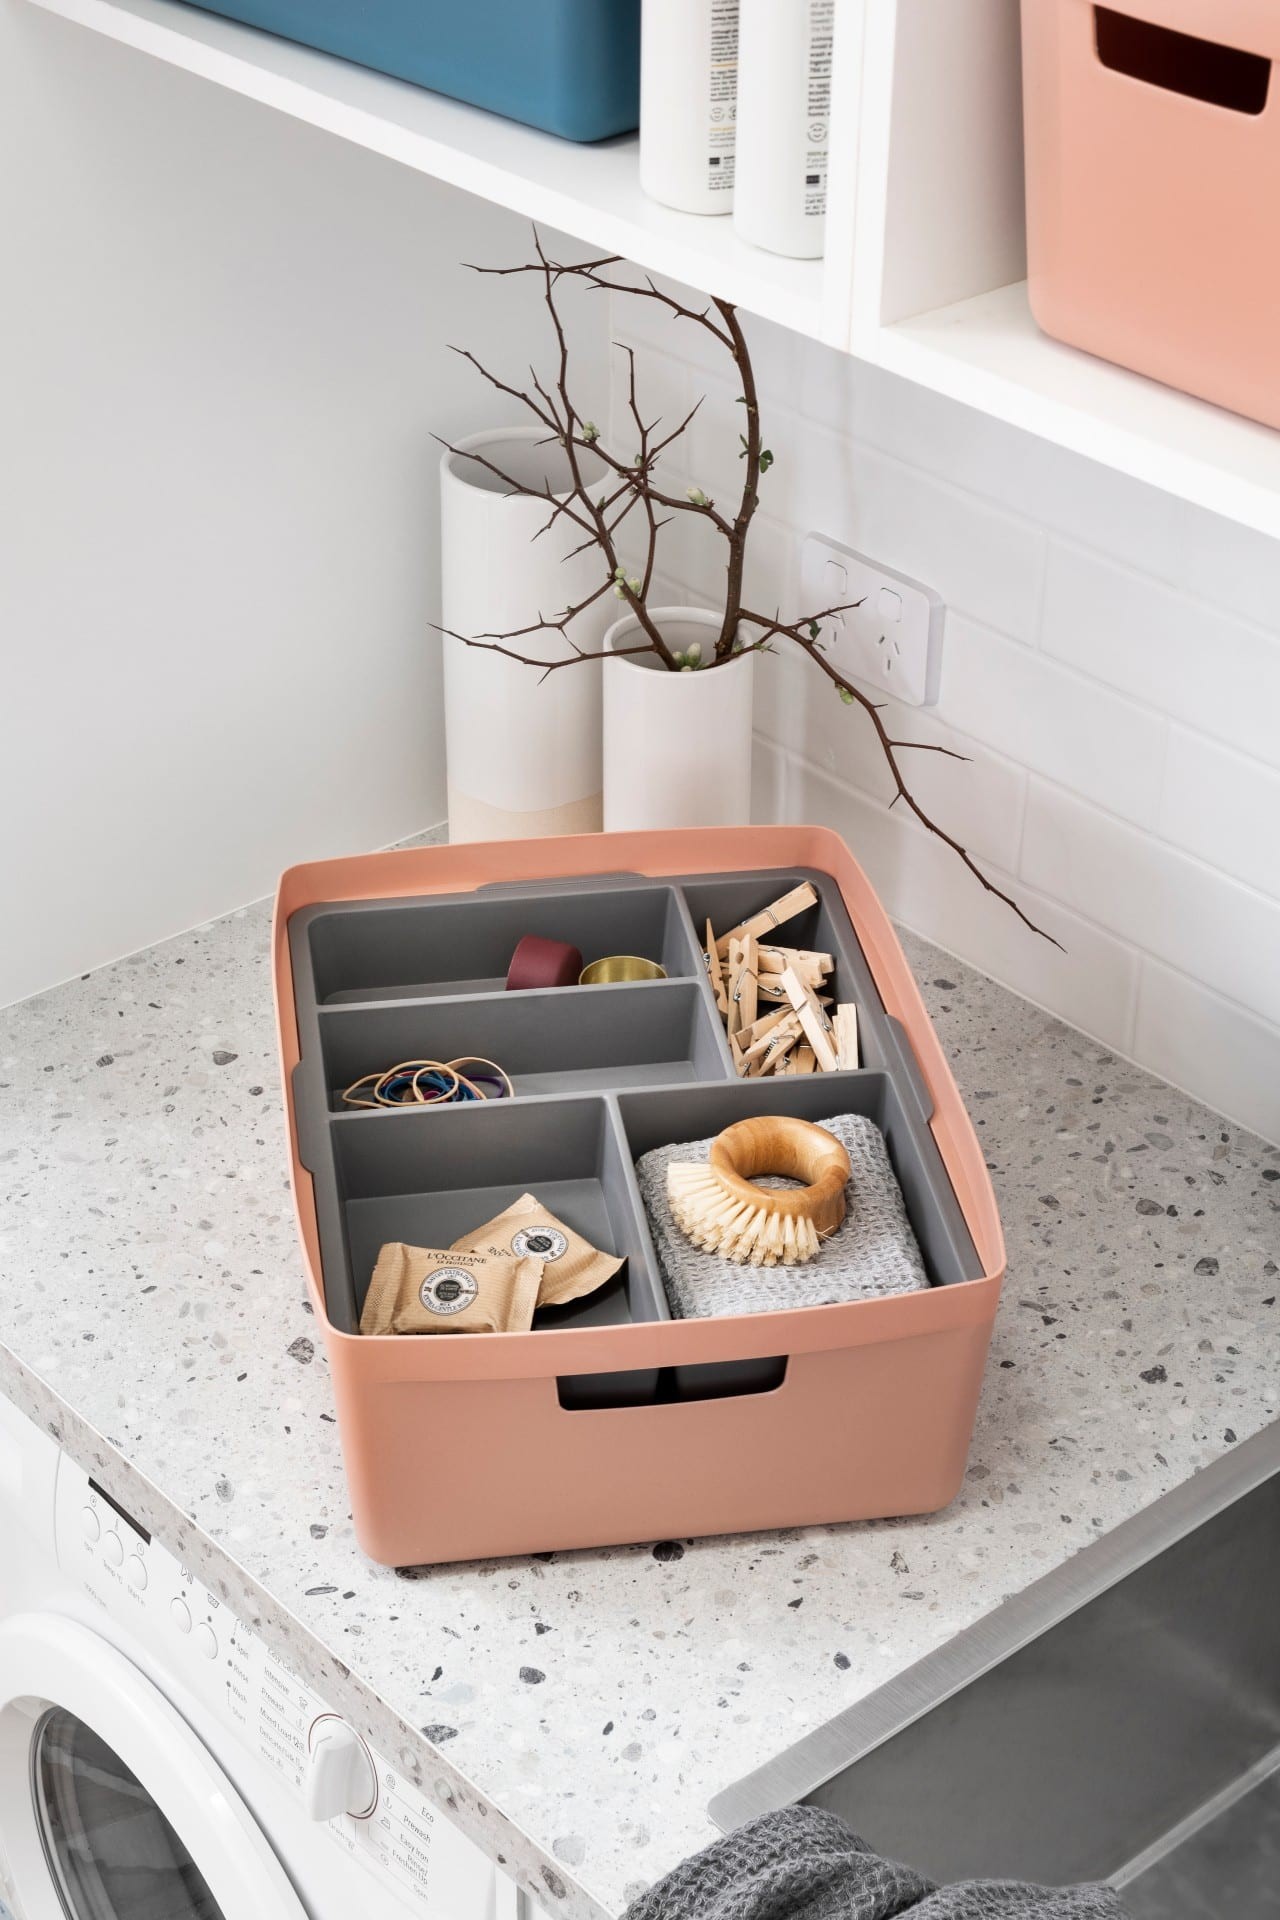 inabox desert clay pink storage boxes for laundry shelves